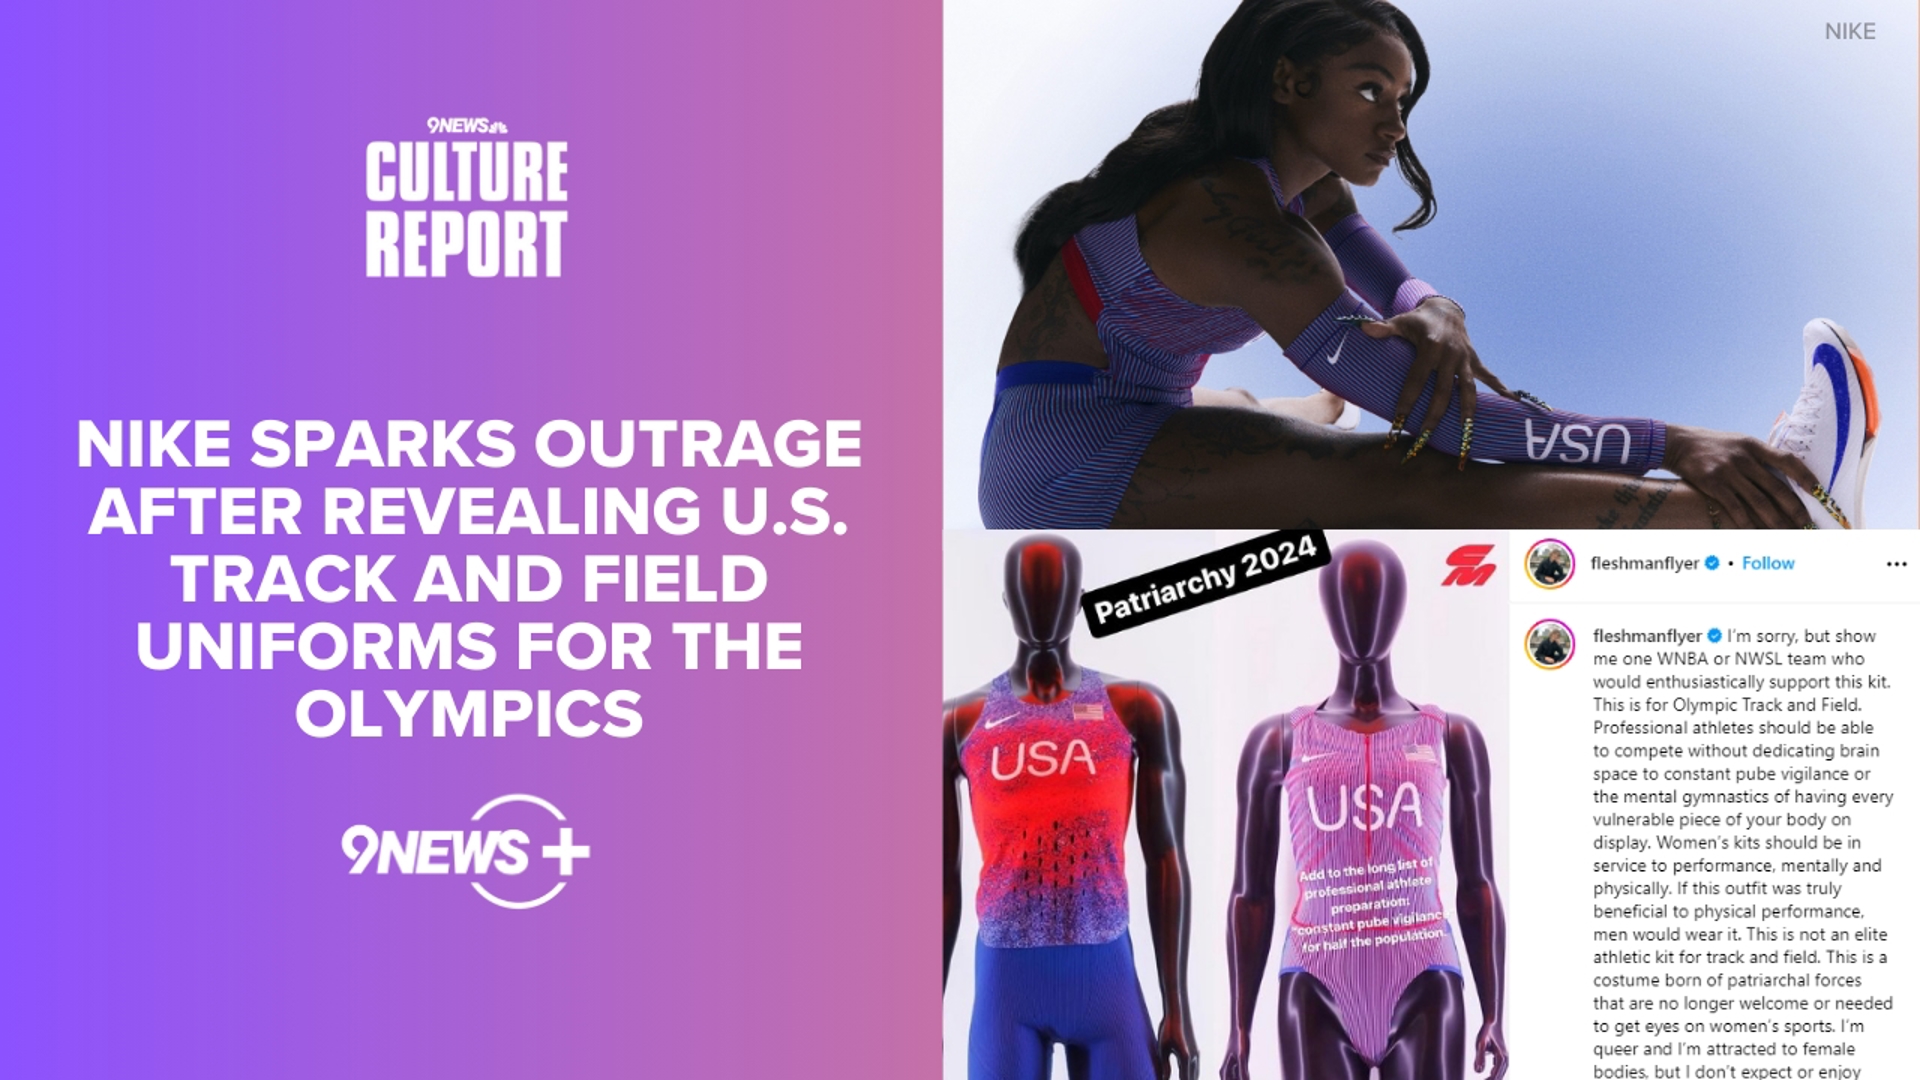 This week we talk about Nike's Olympic track and field leotards, Taylor Swift's record-breaking album release and a campaign to embrace natural hair in Mexico.